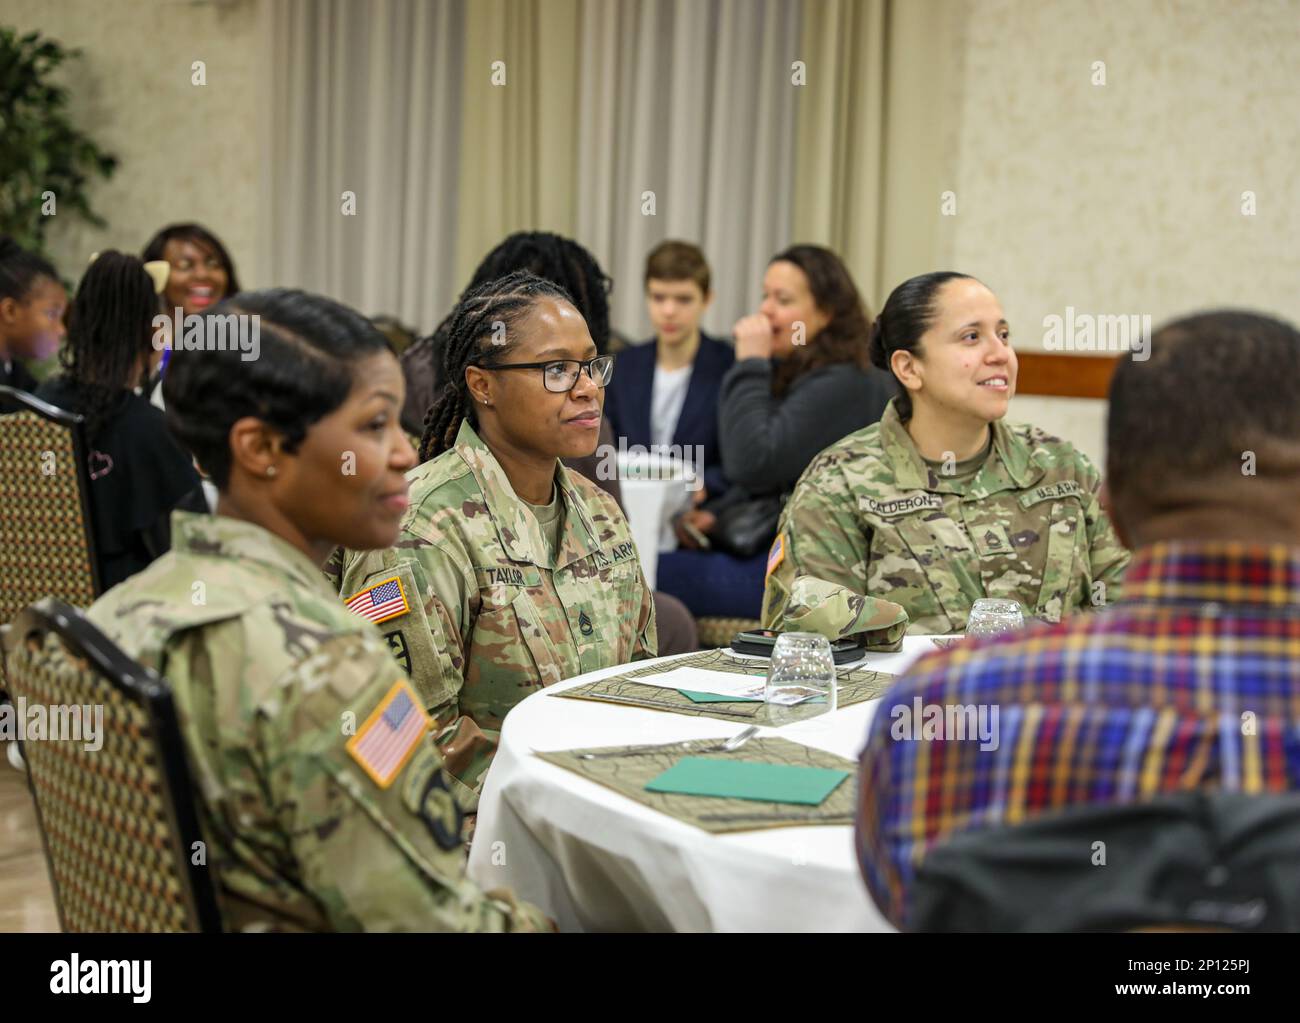 Soldiers station in Vicenza, Italy reflect on past injustices King fought during the civil rights movement during the Dr. Martin Luther King, Jr. prayer breakfast at Caserma Ederle. Stock Photo